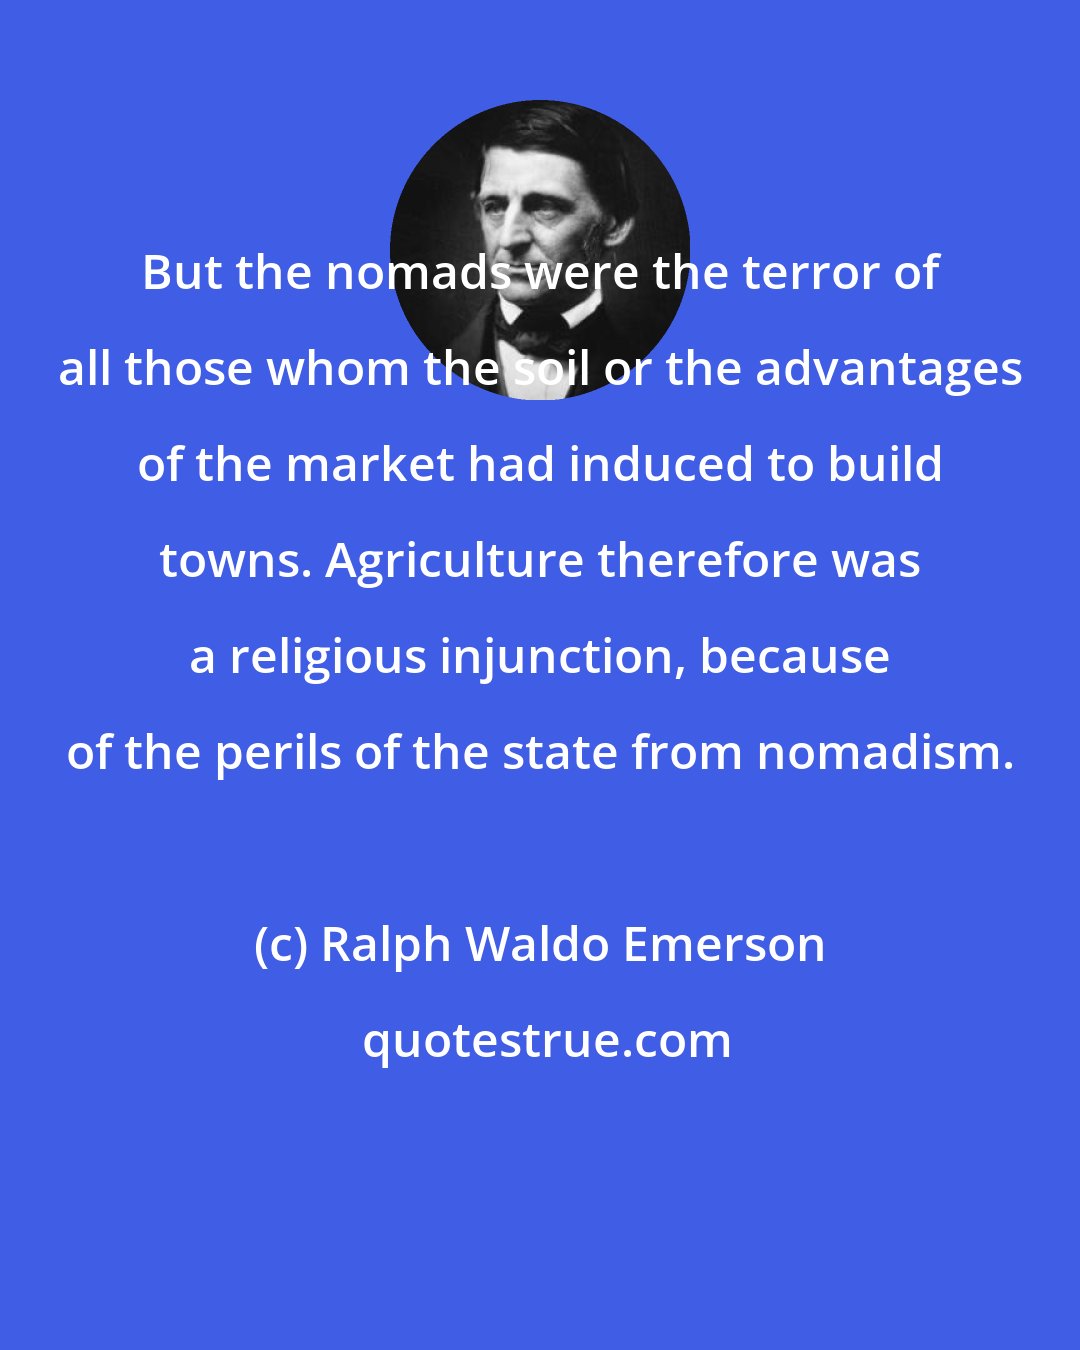 Ralph Waldo Emerson: But the nomads were the terror of all those whom the soil or the advantages of the market had induced to build towns. Agriculture therefore was a religious injunction, because of the perils of the state from nomadism.